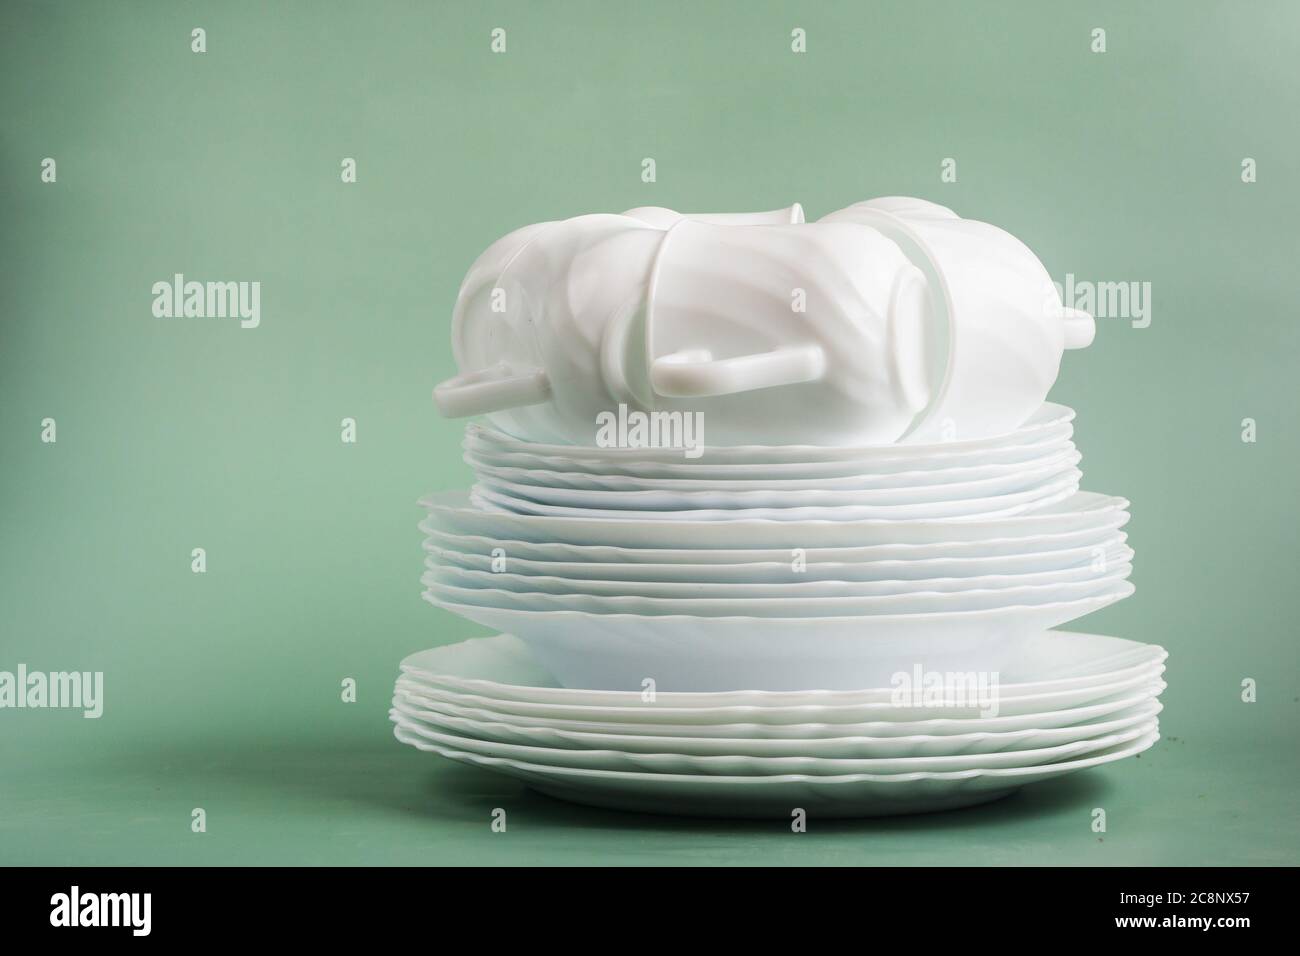 table set of white porcelain dishes on a green background Stock Photo